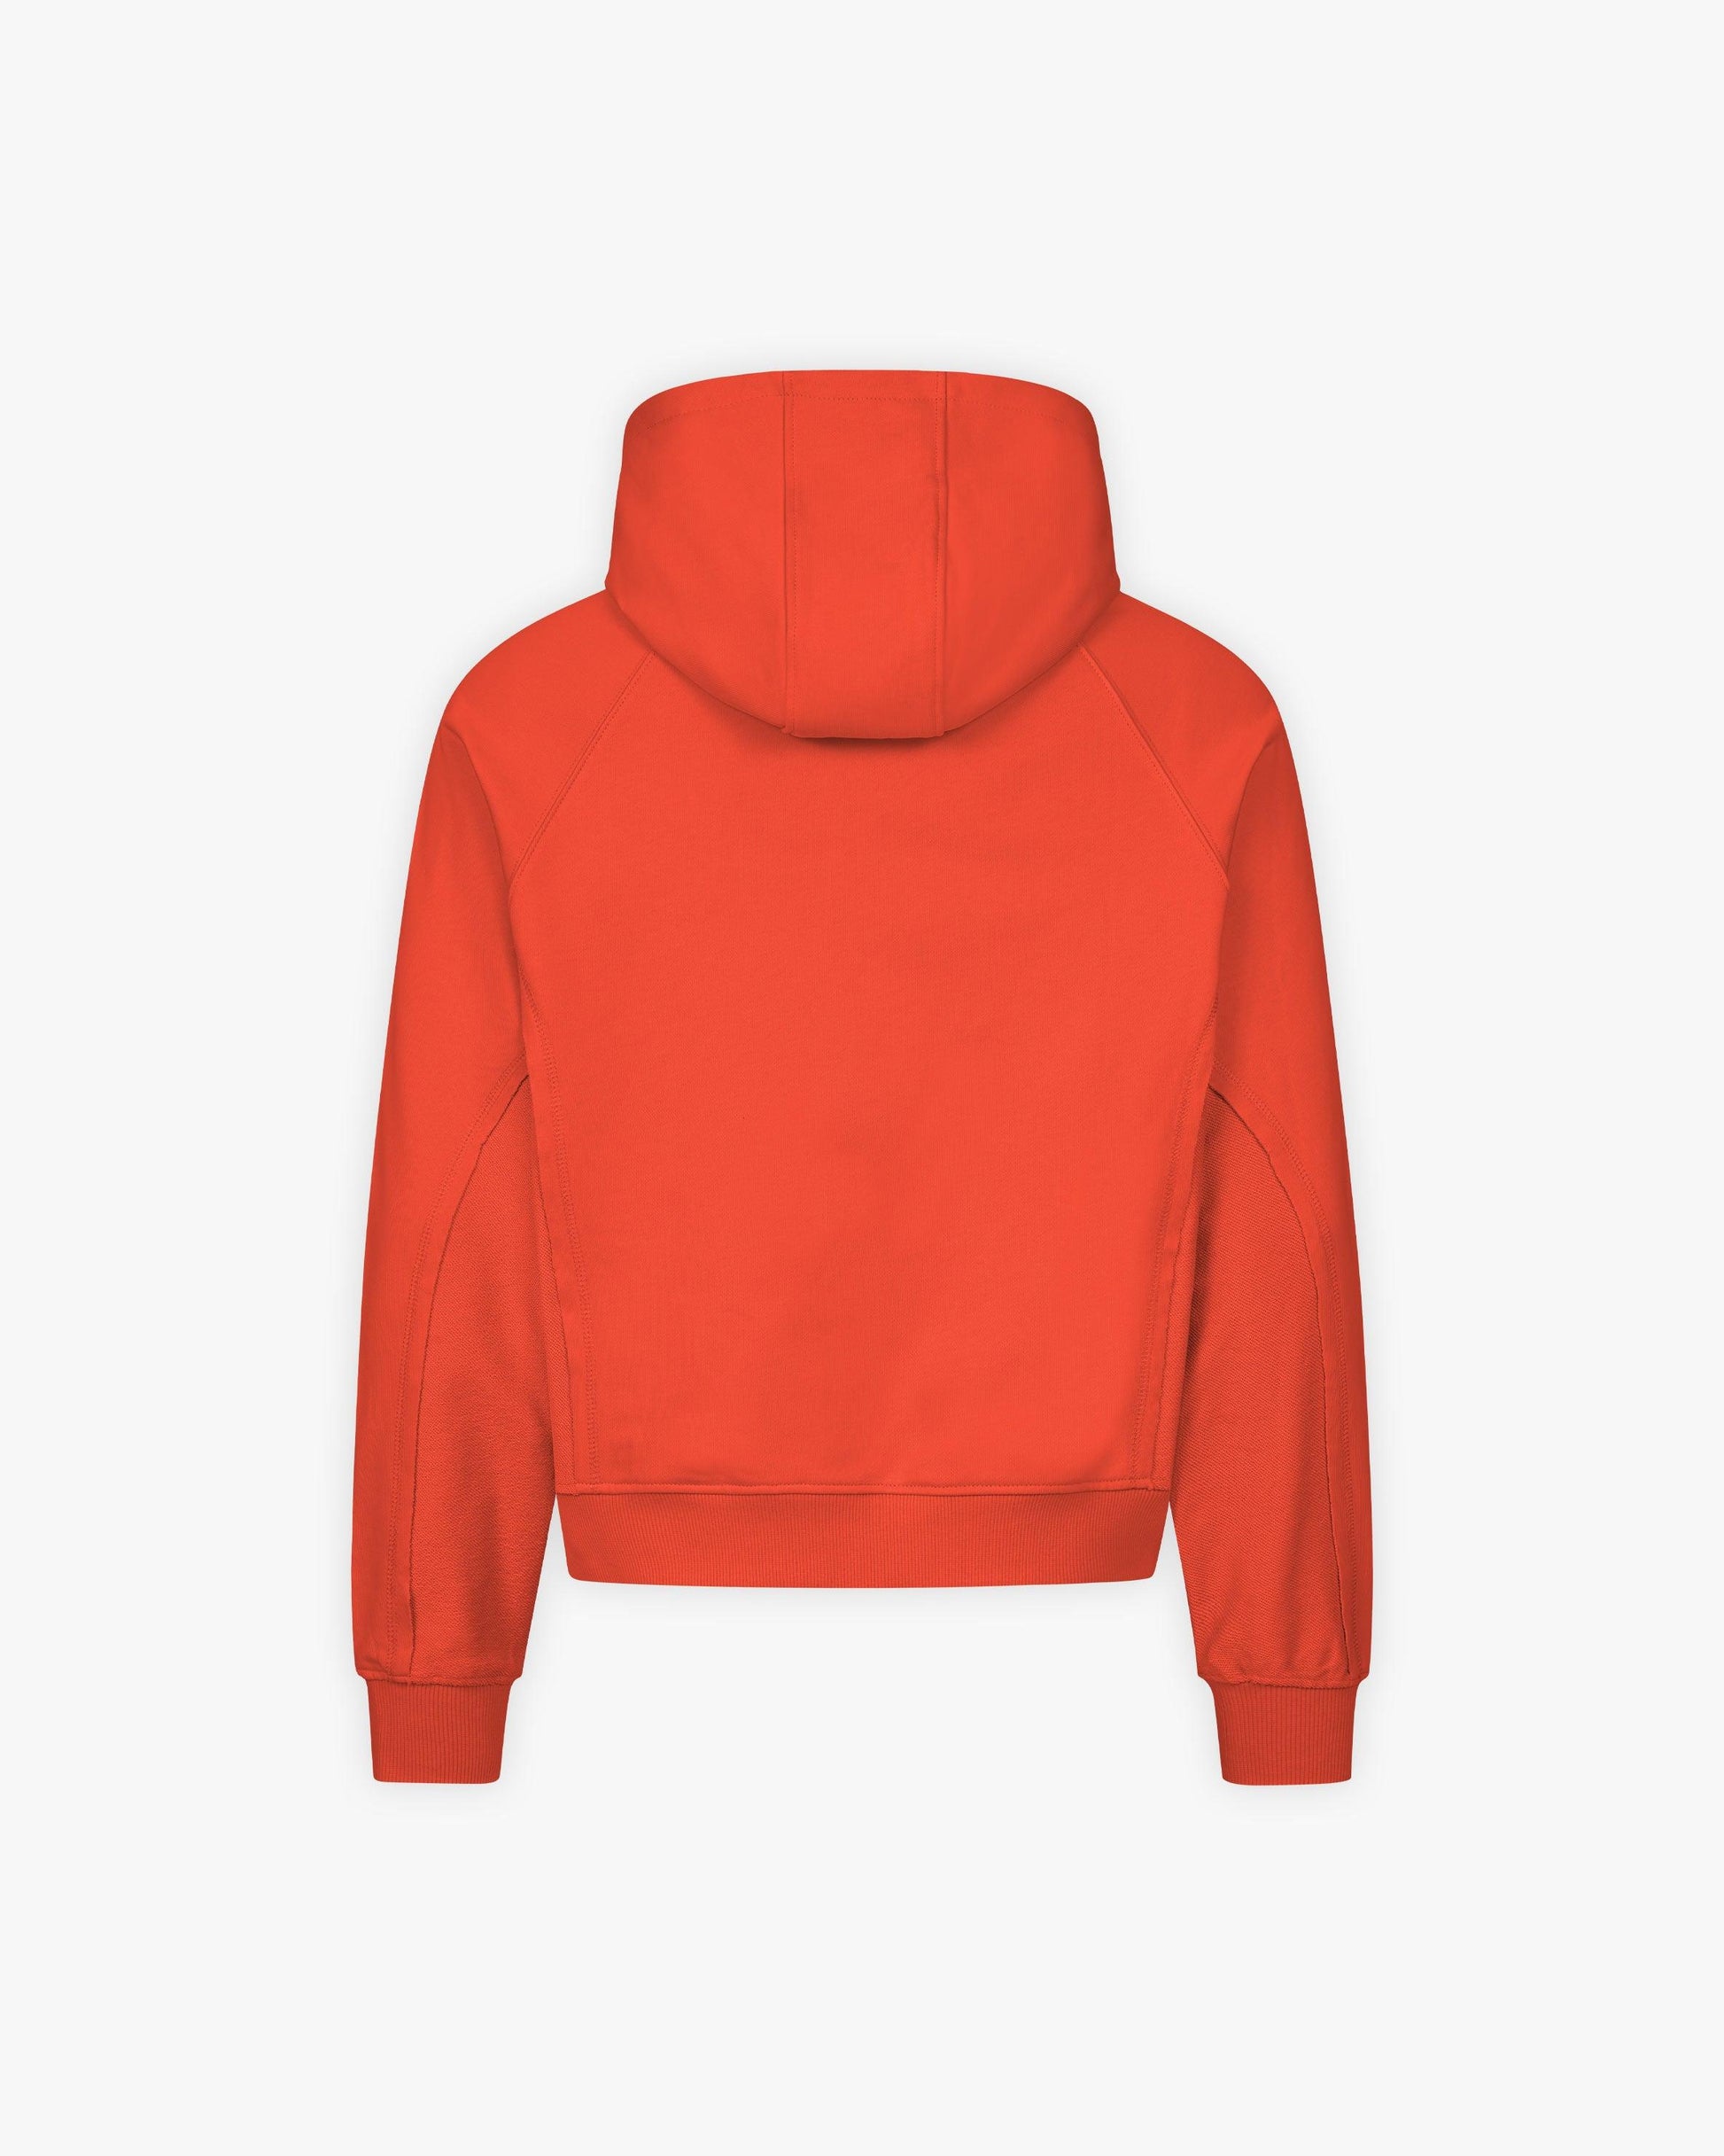 INSIDE OUT HOODIE STRAWBERRY - VICINITY